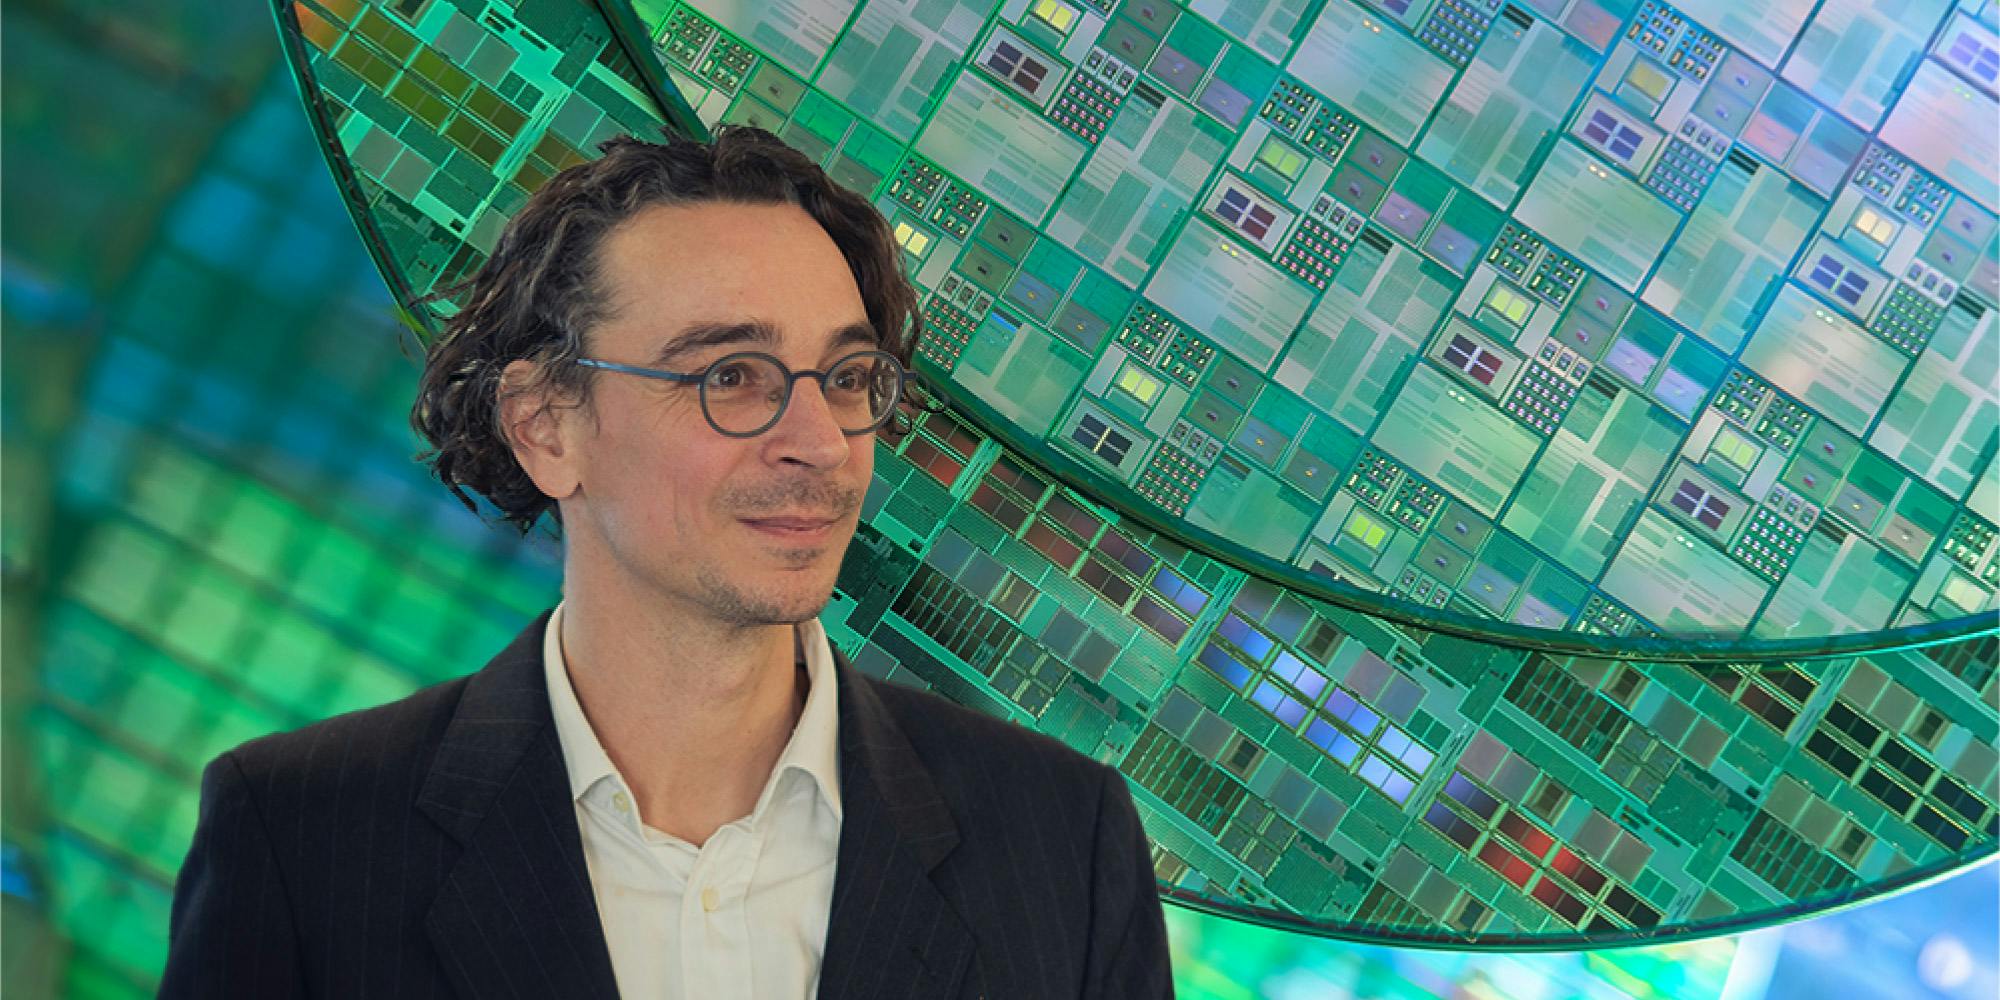  Imec’s Cédric Rolin Talks about the Sustainable Semiconductor Technologies and Systems Research Program